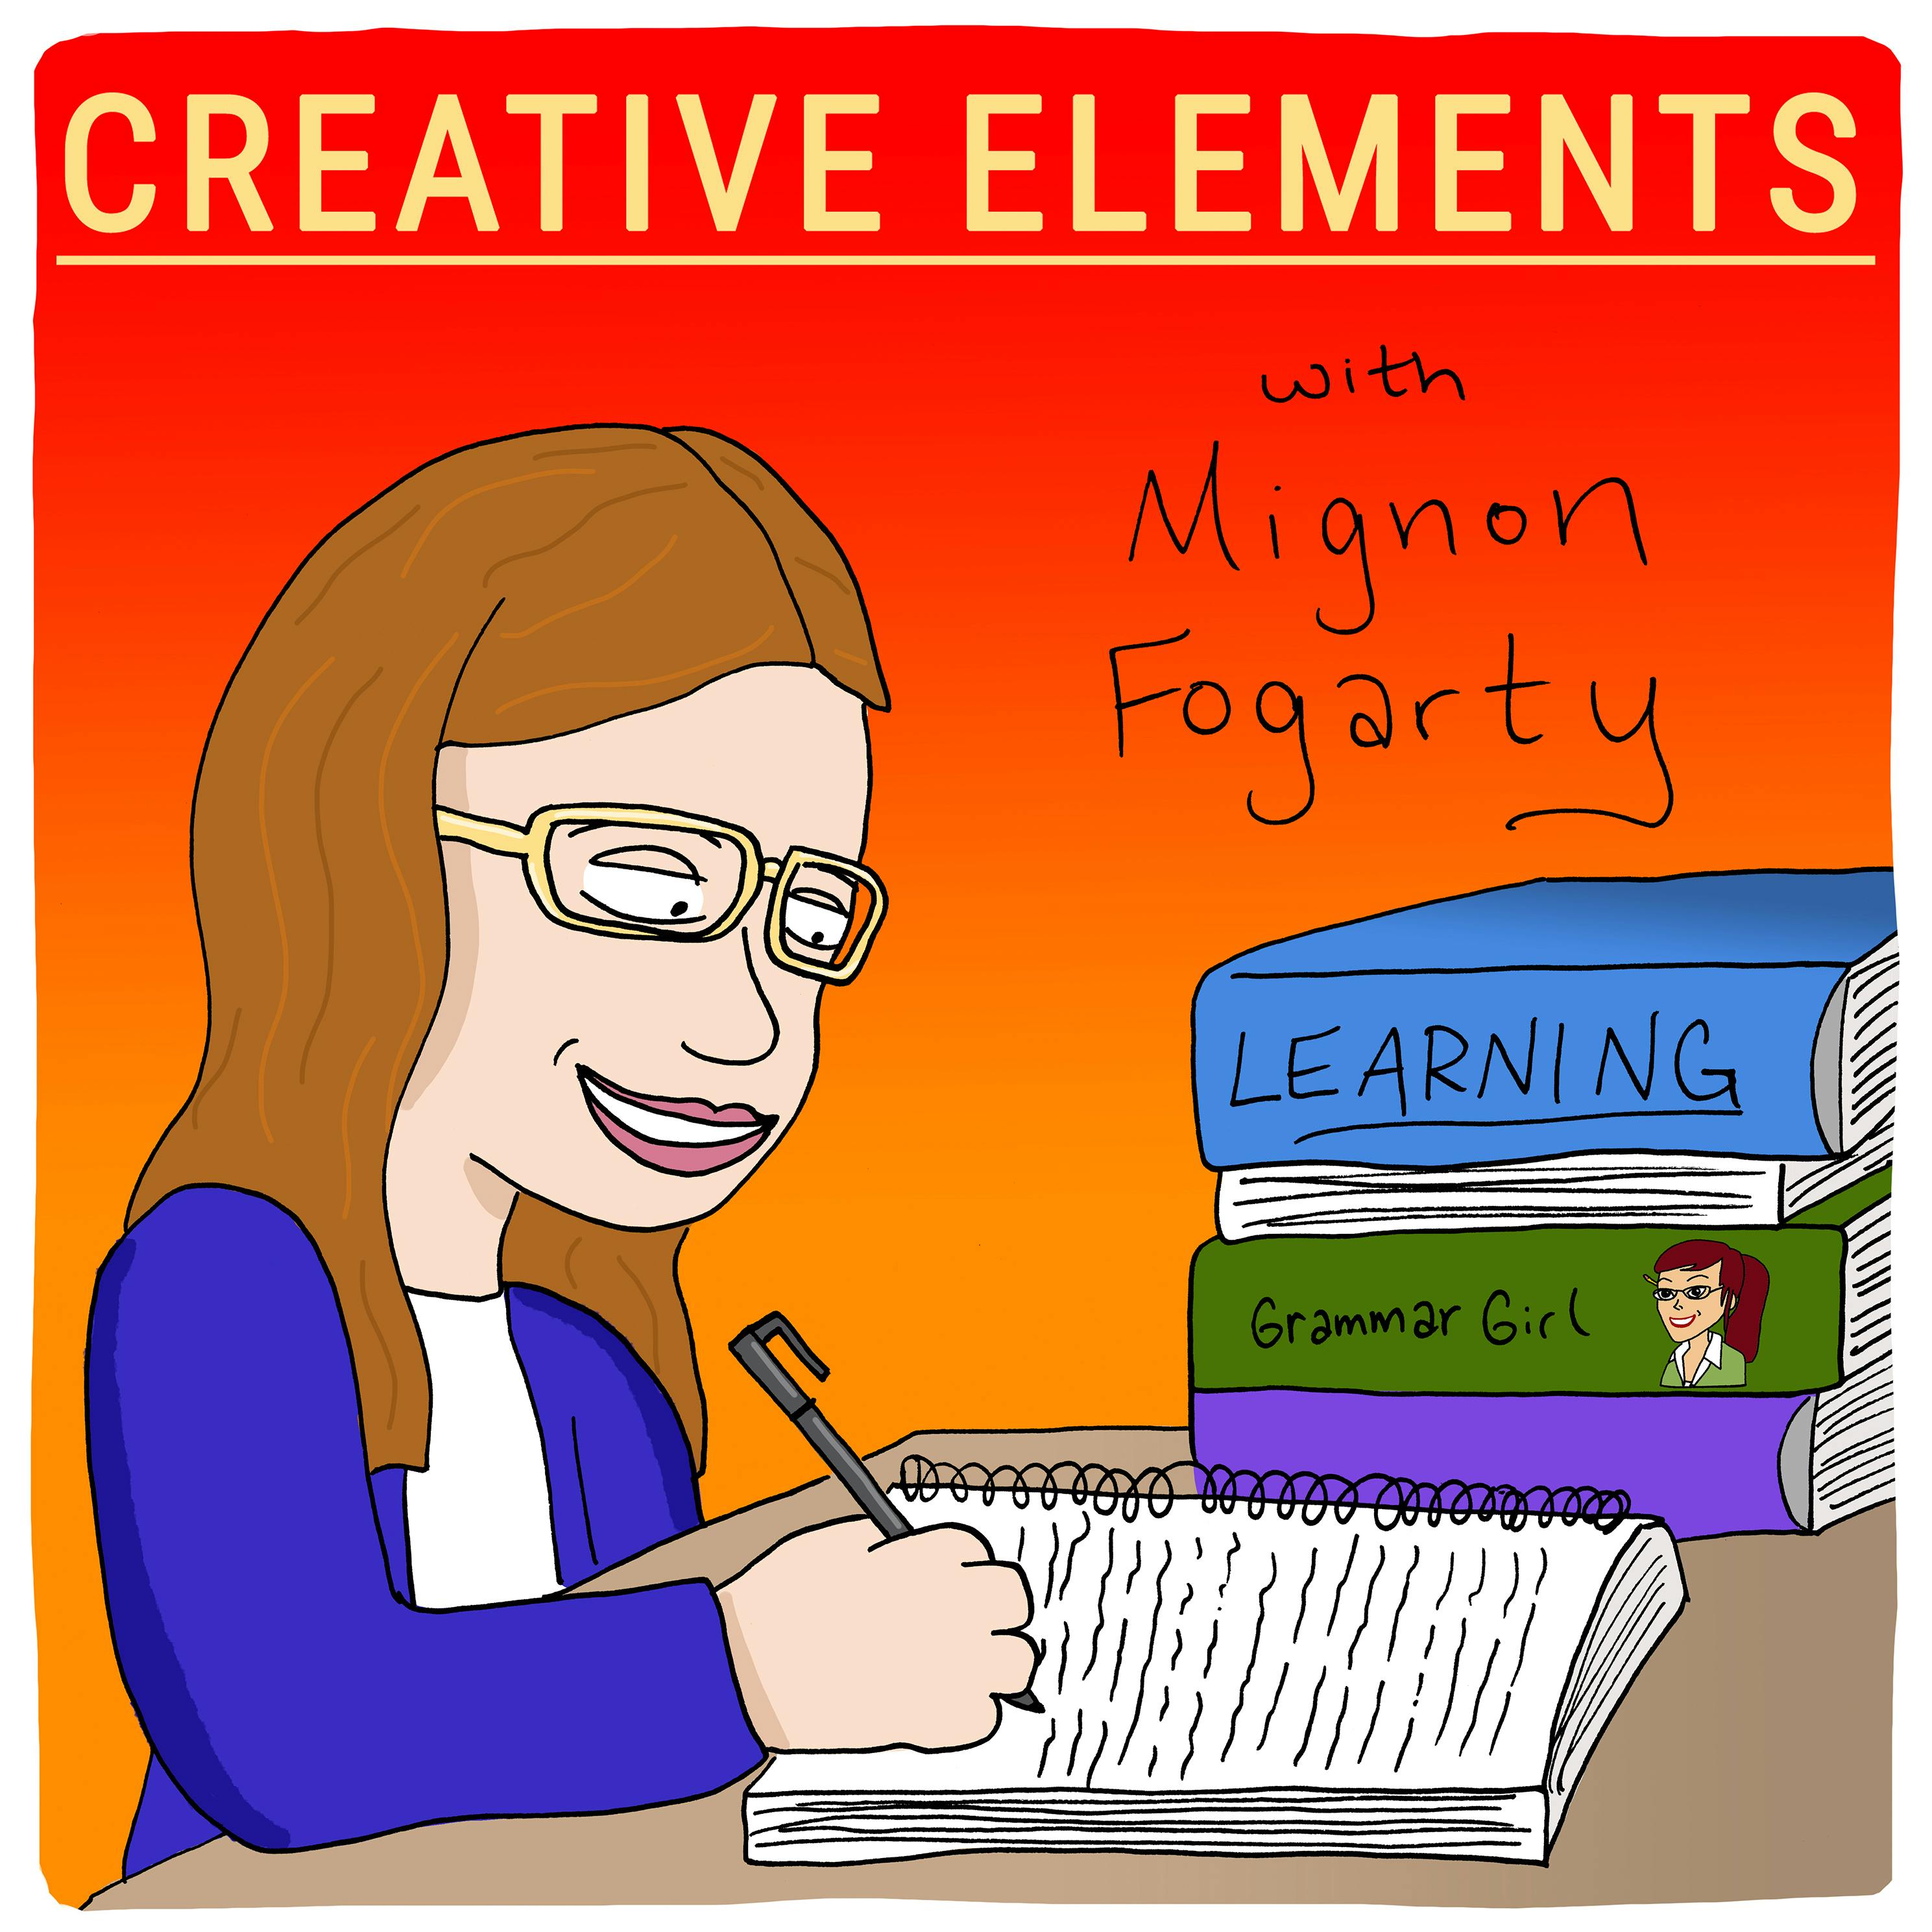 #59: Mignon Fogarty [Learning]